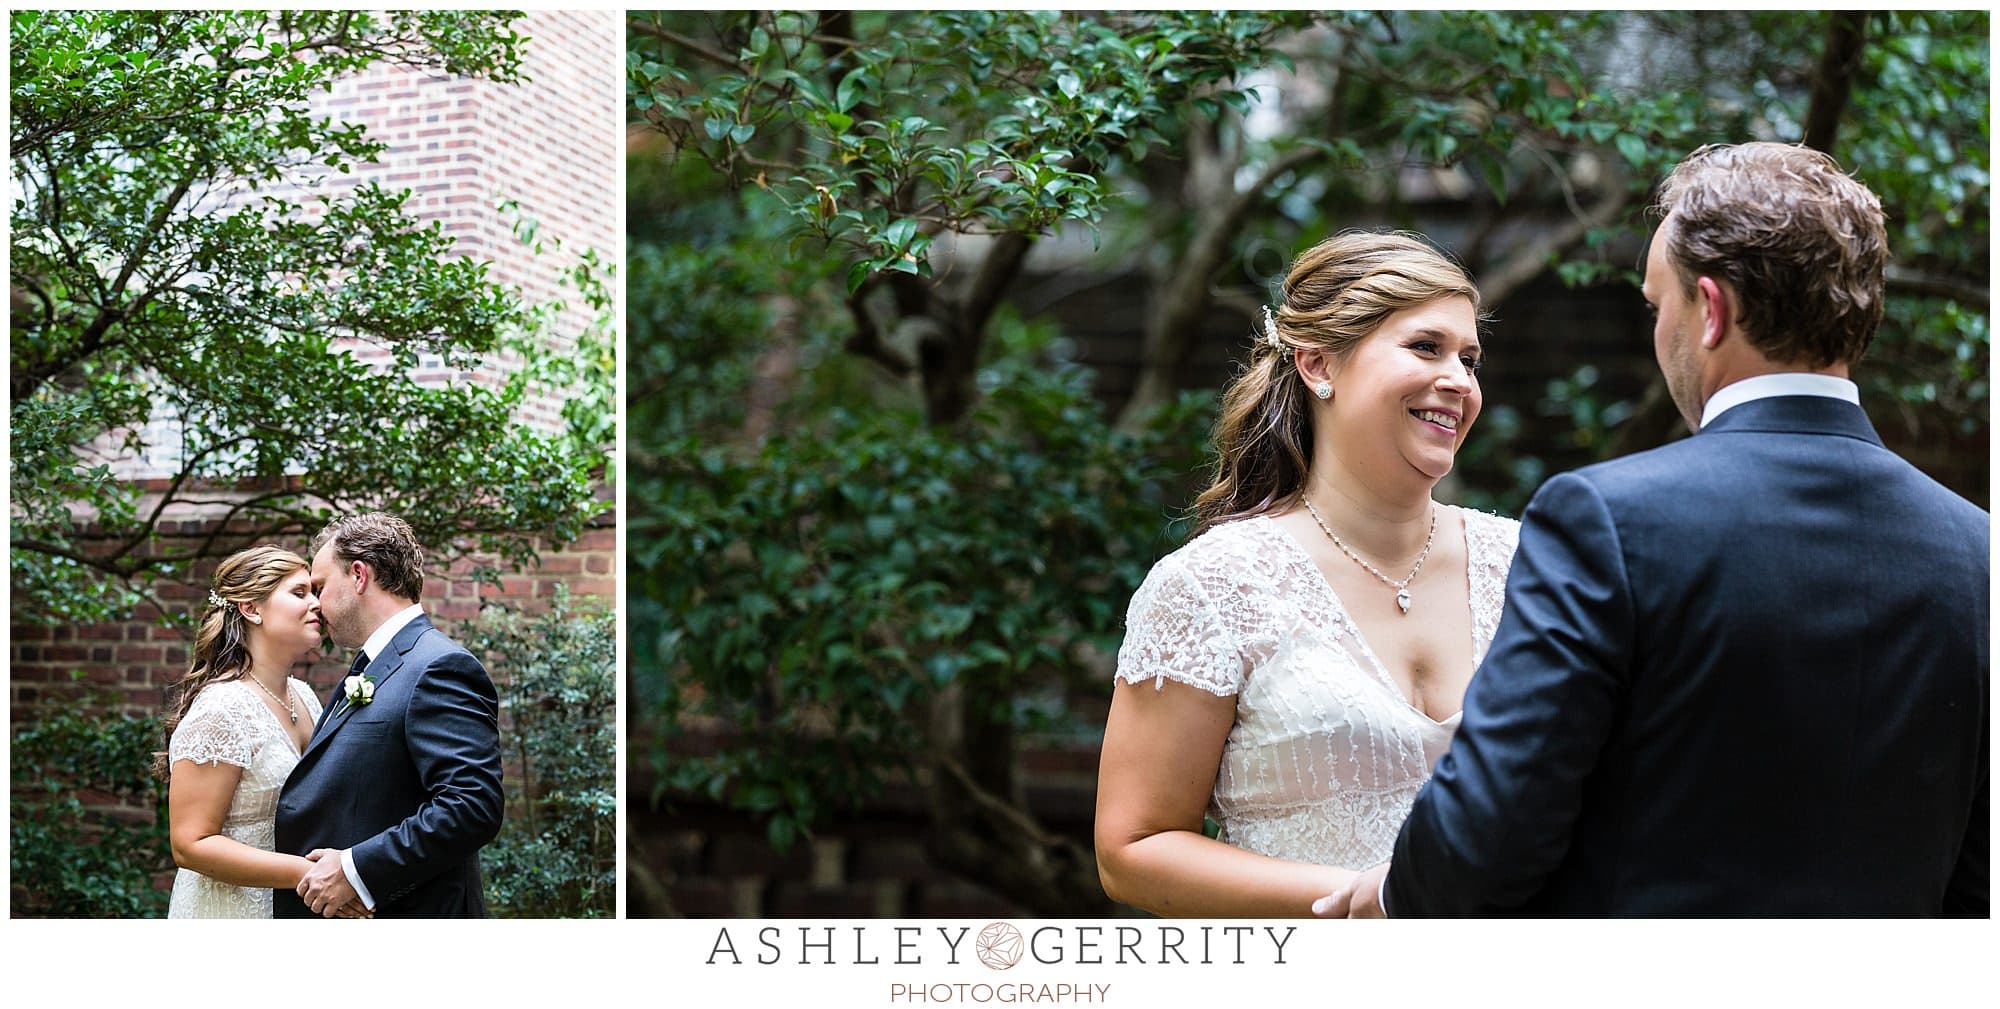 Bride & Groom portraits in the courtyard at the historic Colonial Dames in Philadelphia, PA